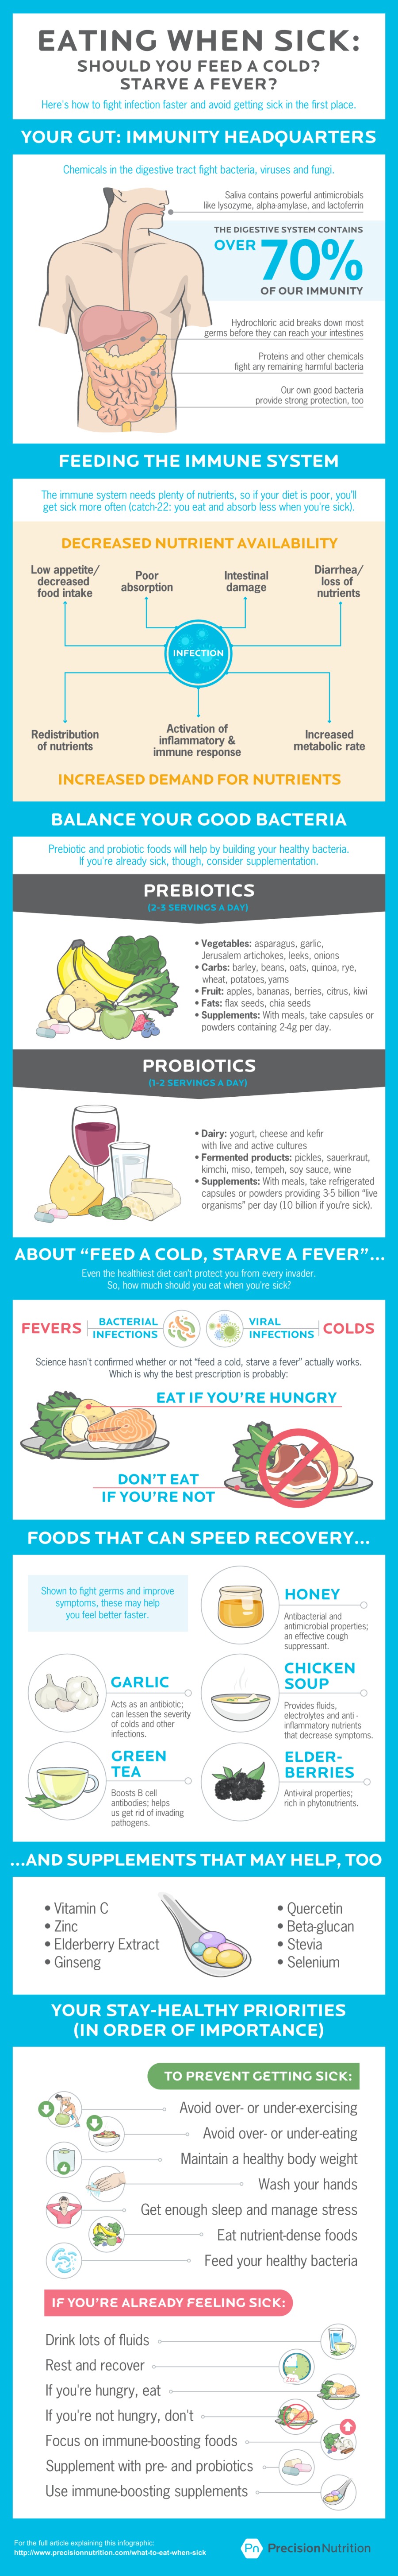 EATING WHEN SICK:

SHOULD YOU FEED A COLD?
STARVE A FEVER?

Here's how to fight infection faster and avoid getting sick in the first place

YOUR GUT: IMMUNITY HEADQUARTERS

Chemicals in the digestive tract fight bacteria, viruses and fungi

Saliva contans powerful antimicrobials
like lysozyme, alpha-amylase, and lactoferrin

THE DIGESTIVE SYSTEM CONTAINS

SEG]

OF OUR IMMUNITY

Hydrochioric acid breaks down most
germs before they can reach your intestines

Proteins and other chemicals
fight any remaining harmful bacteria

Our own good bacteria
provide strong protection, too

FEEDING THE IMMUNE SYSTEM

The immune system needs plenty of nutrients, so if your diet is poor, you'll
get sick more often (catch-22: you eat and absorb less when you're sick)

DECREASED NUTRIENT AVAILABILITY

Low appetite/
decreased
food intake

Diarrhea/
loss of
nutrients

Poor Intestinal
absorption damage

Activation of
inflammatory &
immune response

Redistribution
of nutrients

Increased
metabolic rate

INCREASED DEMAND FOR NUTRIENTS

BALANCE YOUR GOOD BACTERIA

Prebiotic a

PREBIOTICS

* Vegetables: asparagus, garlic,
Jerusalem artichokes, leeks, onions

* Carbs: barley, beans, oats, quinoa, rye,
wheat, potatoes, yams

« Fruit: apples, bananas, berries, citrus, kw

« Fats: flax seeds, chia seeds

+ Supplements: With meals, take capsules or
powders containing 2-4g per day

PROBIOTICS

* Dairy: yogurt, cheese and kefir
with kve and active cultures

* Fermented products: pickles, sauerkraut,
kimchi, miso, tempeh, soy BW

* Supplements: With meals, take re
capsules or powders providing 3-5 billion “live
organisms” per day (10 billion if you're sick).

ABOUT “FEED A COLD, STARVE A FEVER”...

Even the healthiest diet can't protect you from every invader
So, how much should you eat when you're sick?

BACTERIAL /, {a I~ VIRAL
FEVERS INFECTIONS 6) i® / INFECTIONS coLps

Science hasn't confirmed whether or not “feed a cold, starve a fever” actually works.
Which is why the best prescription is probably.

EAT IF YOU'RE HUNGRY

 

HONEY

Antibactenal and
antimicrobial properties;
an effective cough
suppressant

CHICKEN

GARLIC

Acts as an antibiotic;
can lessen the severity
of colds and other
nfections.

GREEN
TEA

Boosts B cell
antibodies; helps

SOUP

Prowdes fluids,
electrolytes and ant -
nflam matory nutnents
that decrease symptoms.

ELDER-
BERRIES

Antiviral properties;
rich in phytonutnents.

us get nd of invading
pathogens

...AND SUPPLEMENTS THAT MAY HELP, TOO

e Vitamin C Quercetin

e Zinc  Beta-glucan
e Elderberry Extract * Stevia

* Ginseng Selenium

YOUR STAY-HEALTHY PRIORITIES
(IN ORDER OF IMPORTANCE)

TO PREVENT GETTING SICK:

Avoid over- or under-exercising

Avoid over- or under-eating

Maintain a healthy body weight

Wash your hands

Get enough sleep and manage stress
Eat nutrient-dense foods

Feed your healthy bacteria

IF YOU'RE ALREADY FEELING SICK:

Drink lots of fluids

Rest and recover

If you're hungry, eat

If you're not hungry, don't

Focus on immune-boosting foods
Supplement with pre- and probiotics
Use immune-boosting supplements

what-to-eat-when-sick